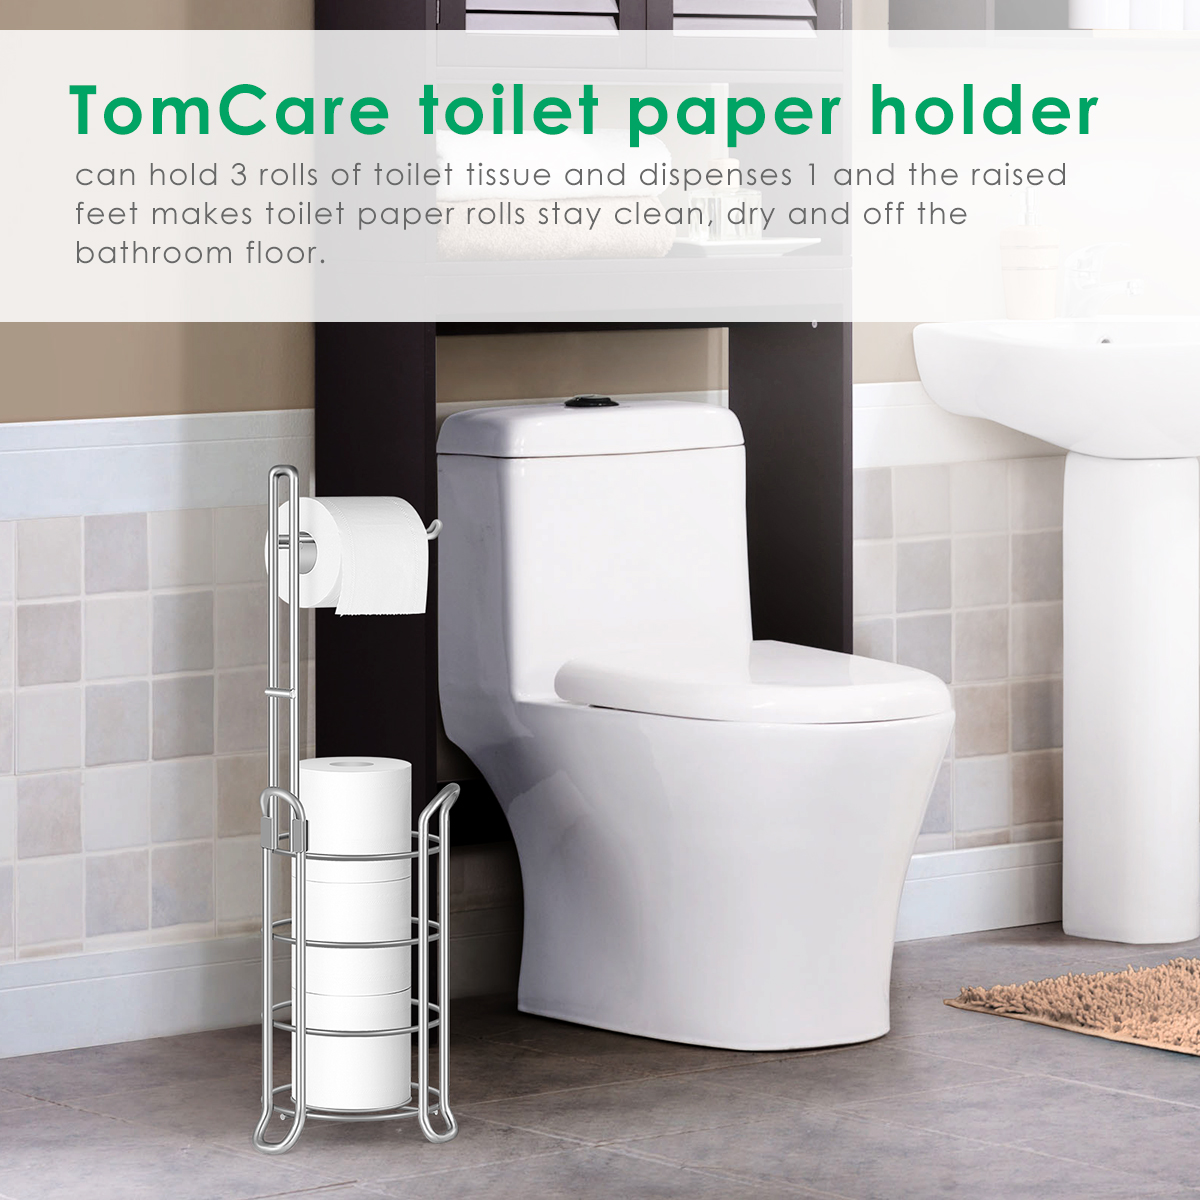 TomCare Toilet Paper Holder Toilet Paper Stand Free-Standing Toilet Tissue Paper Roll Bathroom Storage Shelf and Dispenser for 3 Spare Rolls Metal Wire Bathroom Accessories Storage Organizer Silver